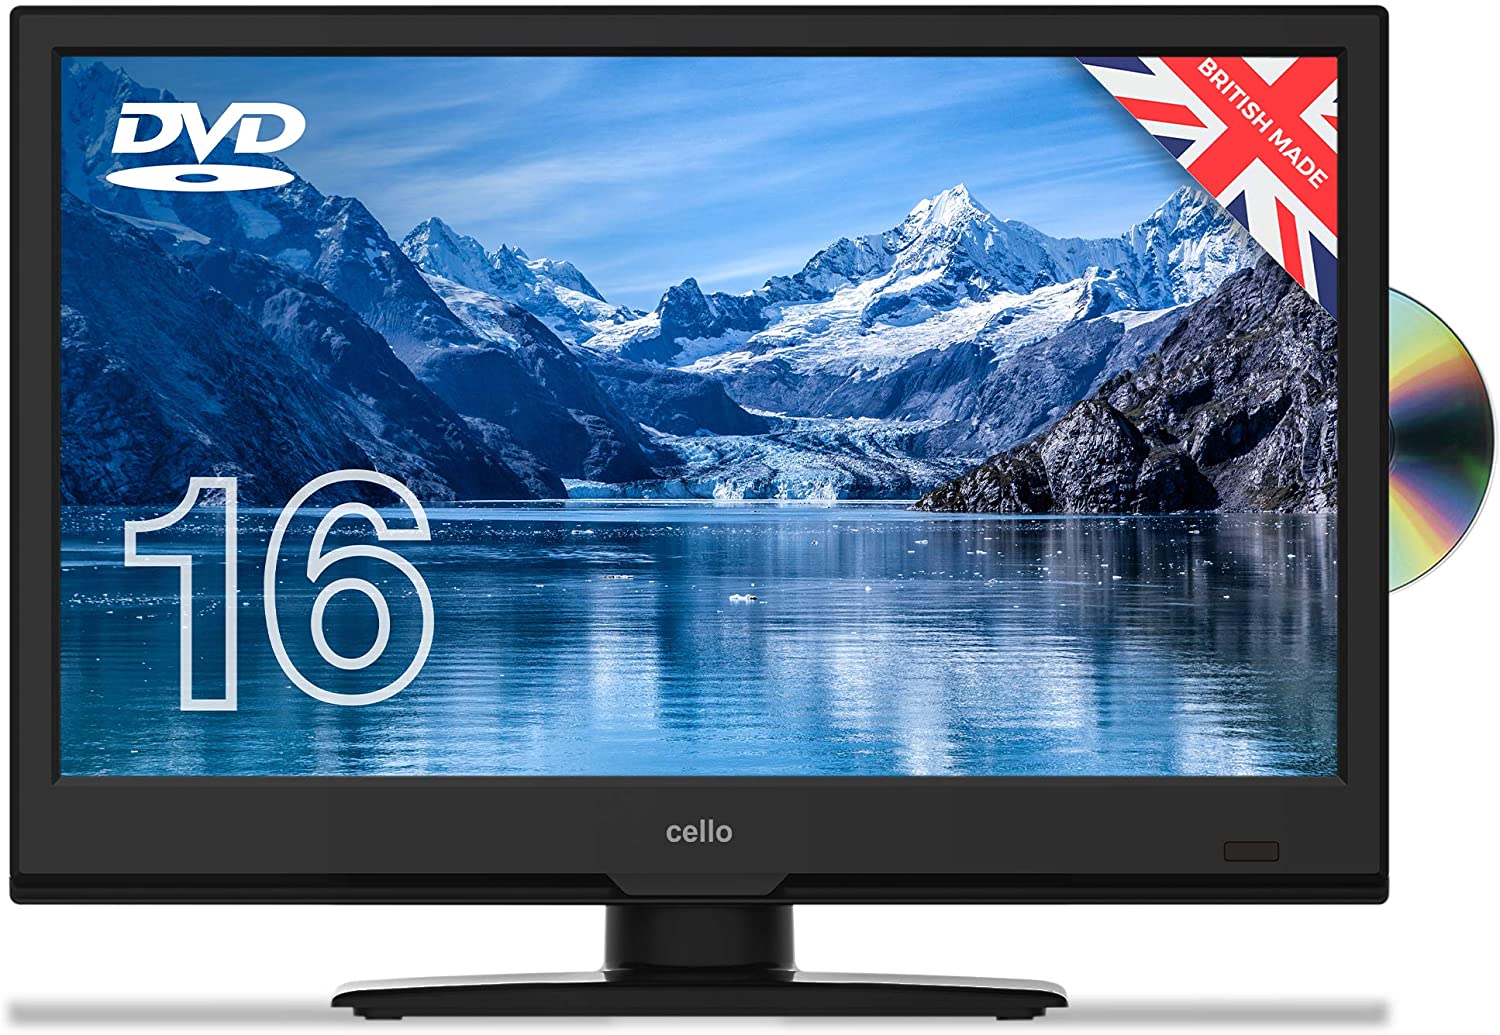 Cello 16 inch Full HD LED TV/DVD Freeview HD and Satellite